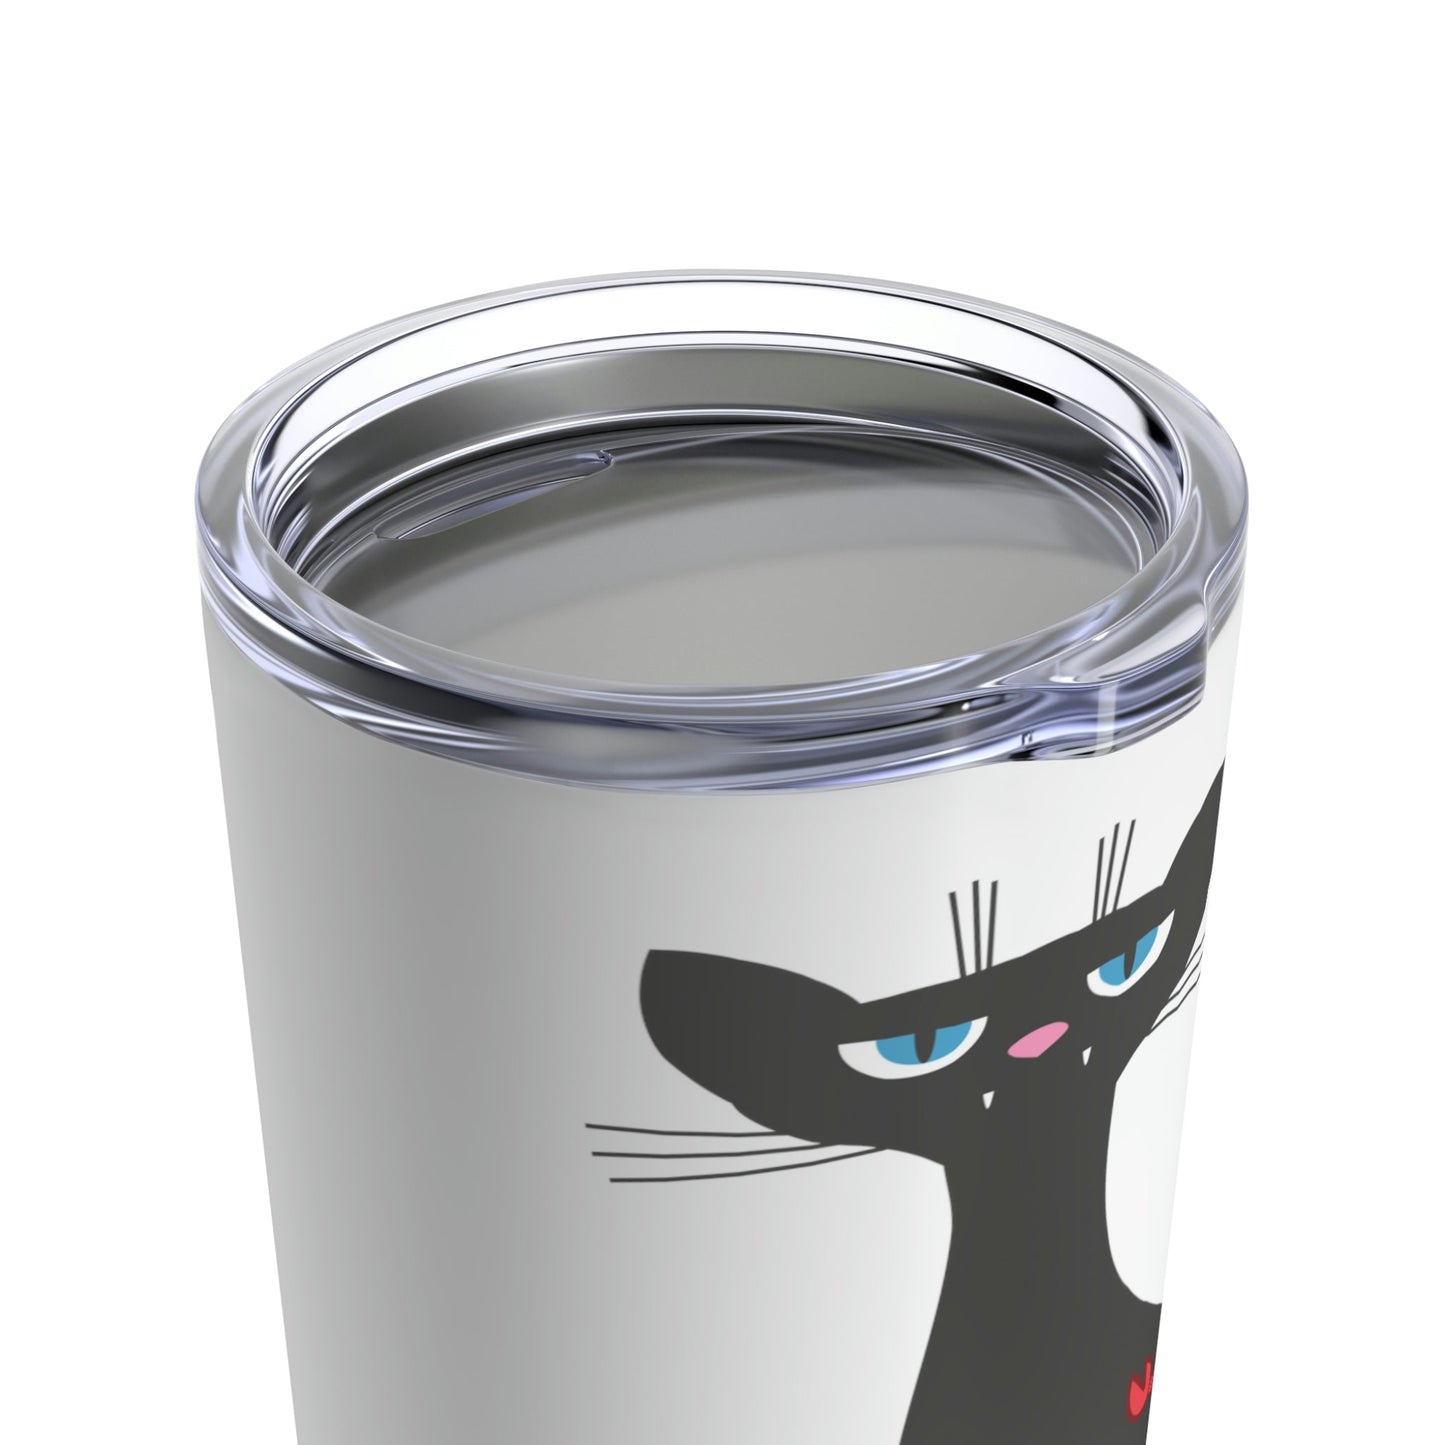 Cancer Cat Zodiac Sign Stainless Steel Hot or Cold Vacuum Tumbler 20oz Ichaku [Perfect Gifts Selection]